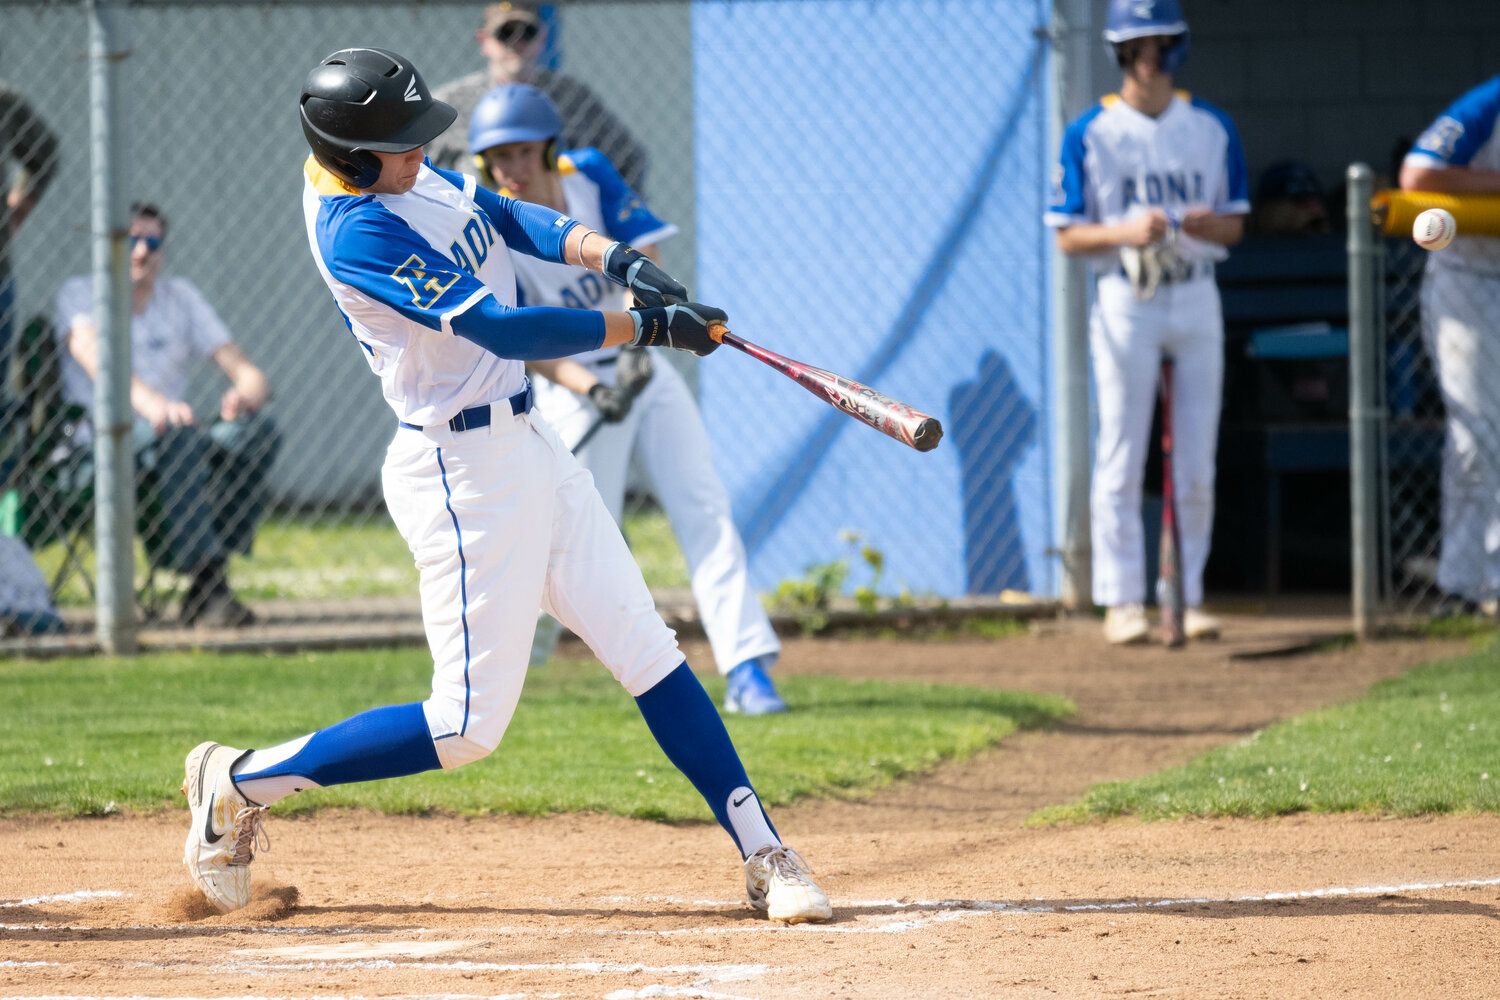 Owen Fagerness cranks a 2-RBI double in the first inning of Adna's 15-5 loss to Toutle Lake in the 2B District 4 tournament semifinals, in Adna on May 9.